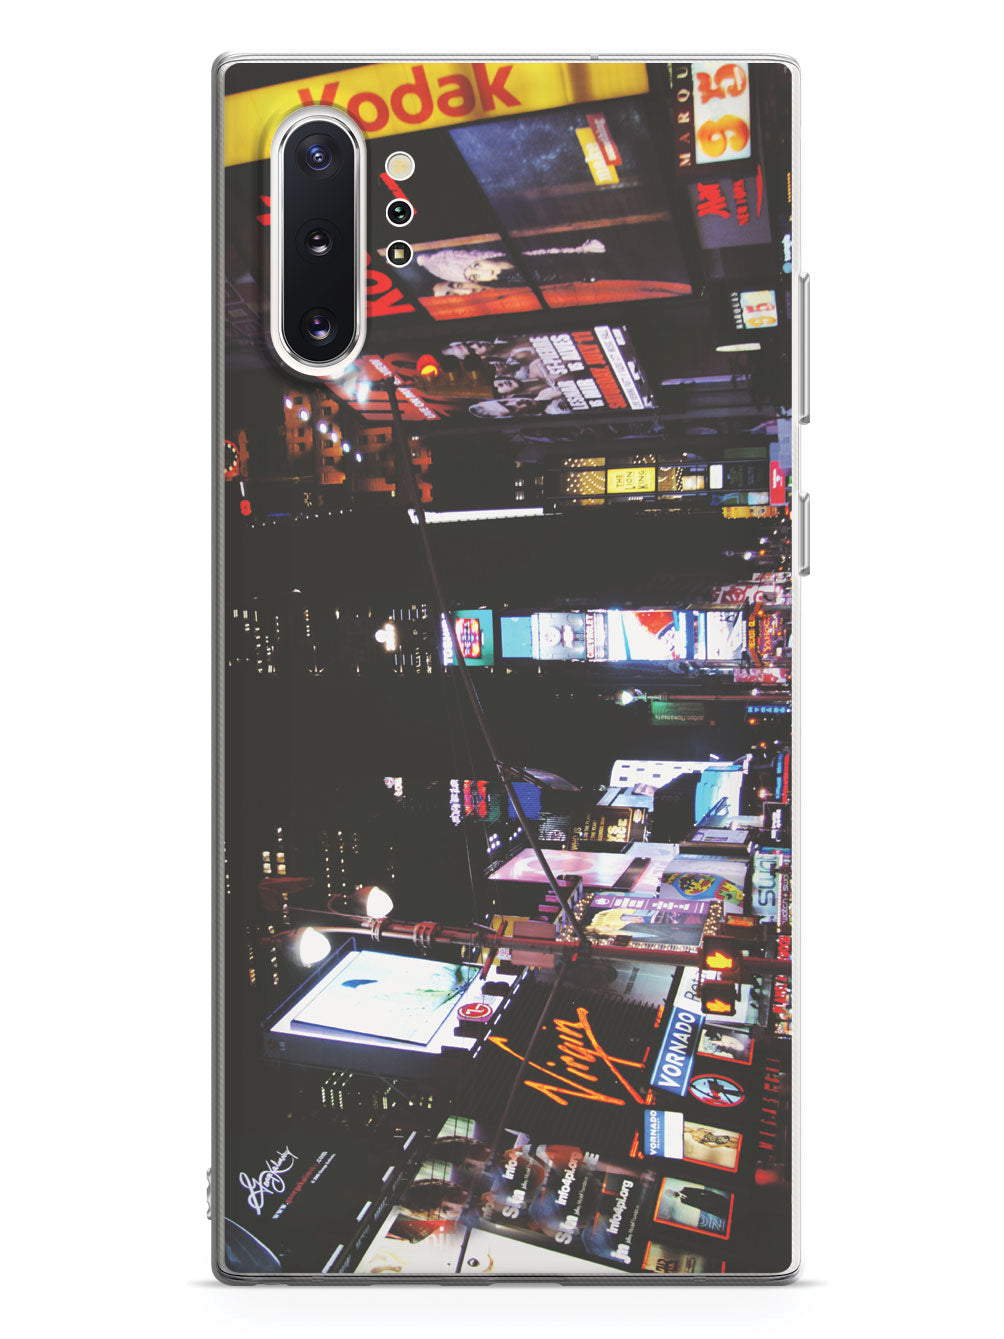 New York City Lights Times Square Case